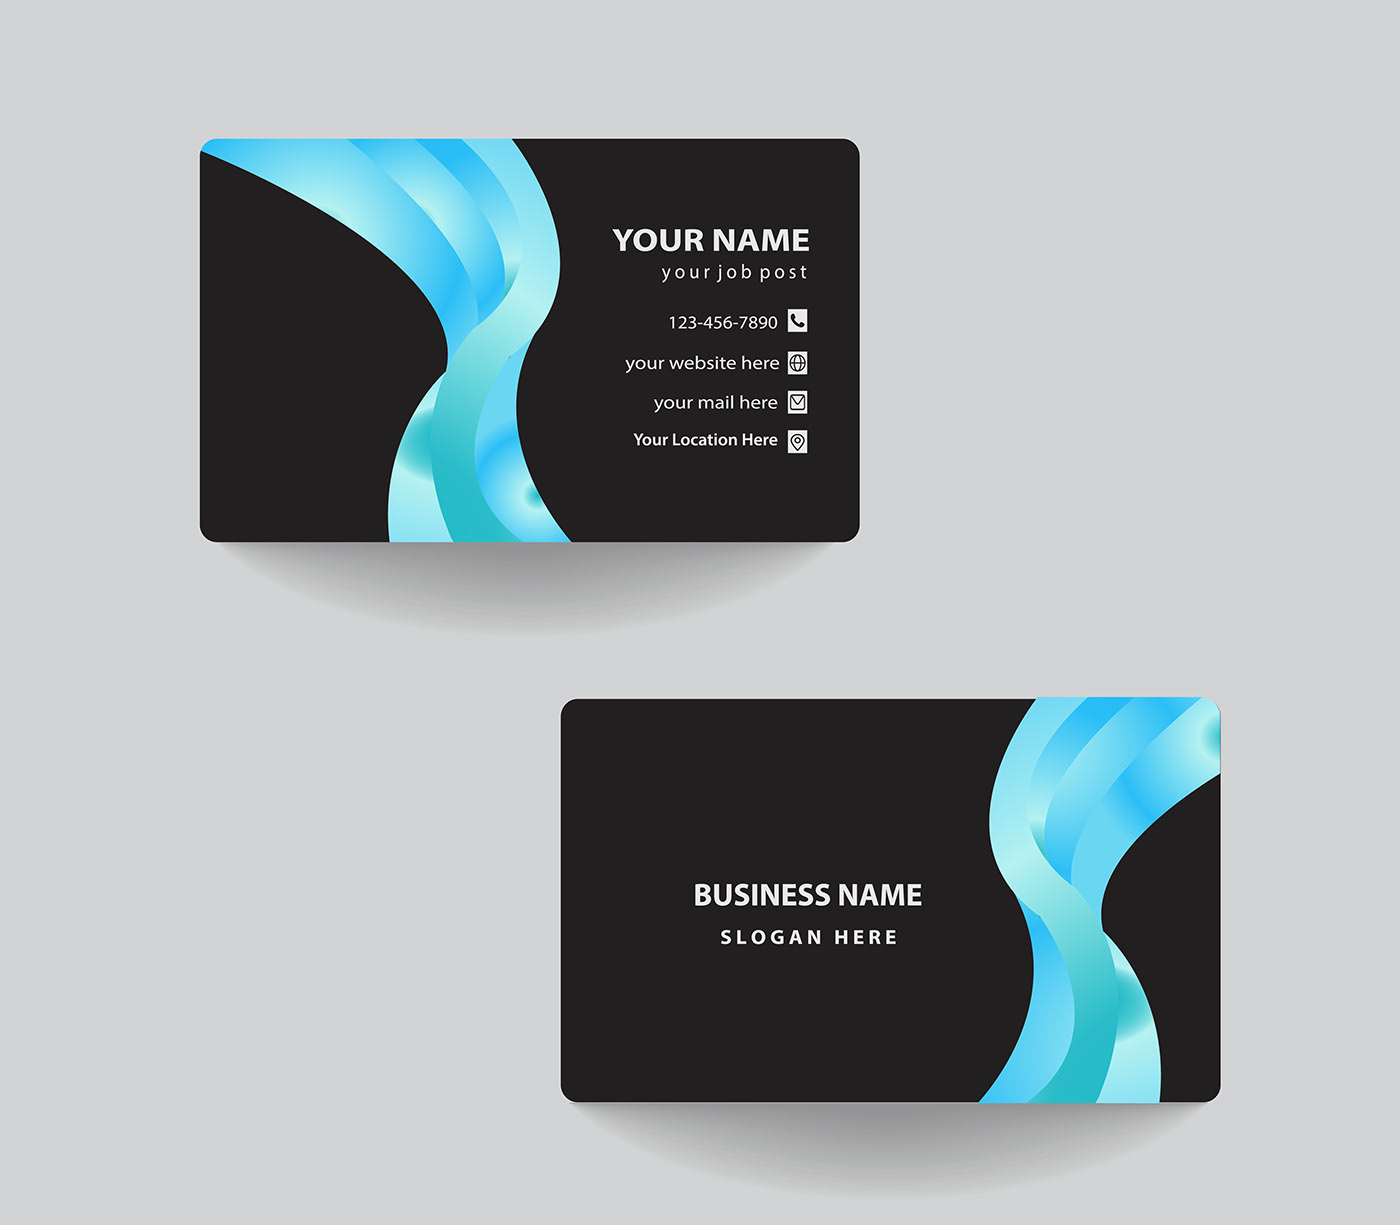 businesscard graphicdesign branding  brand identity Graphic Designer visitingcard visiting card design Business Cards graphic design  visual identity